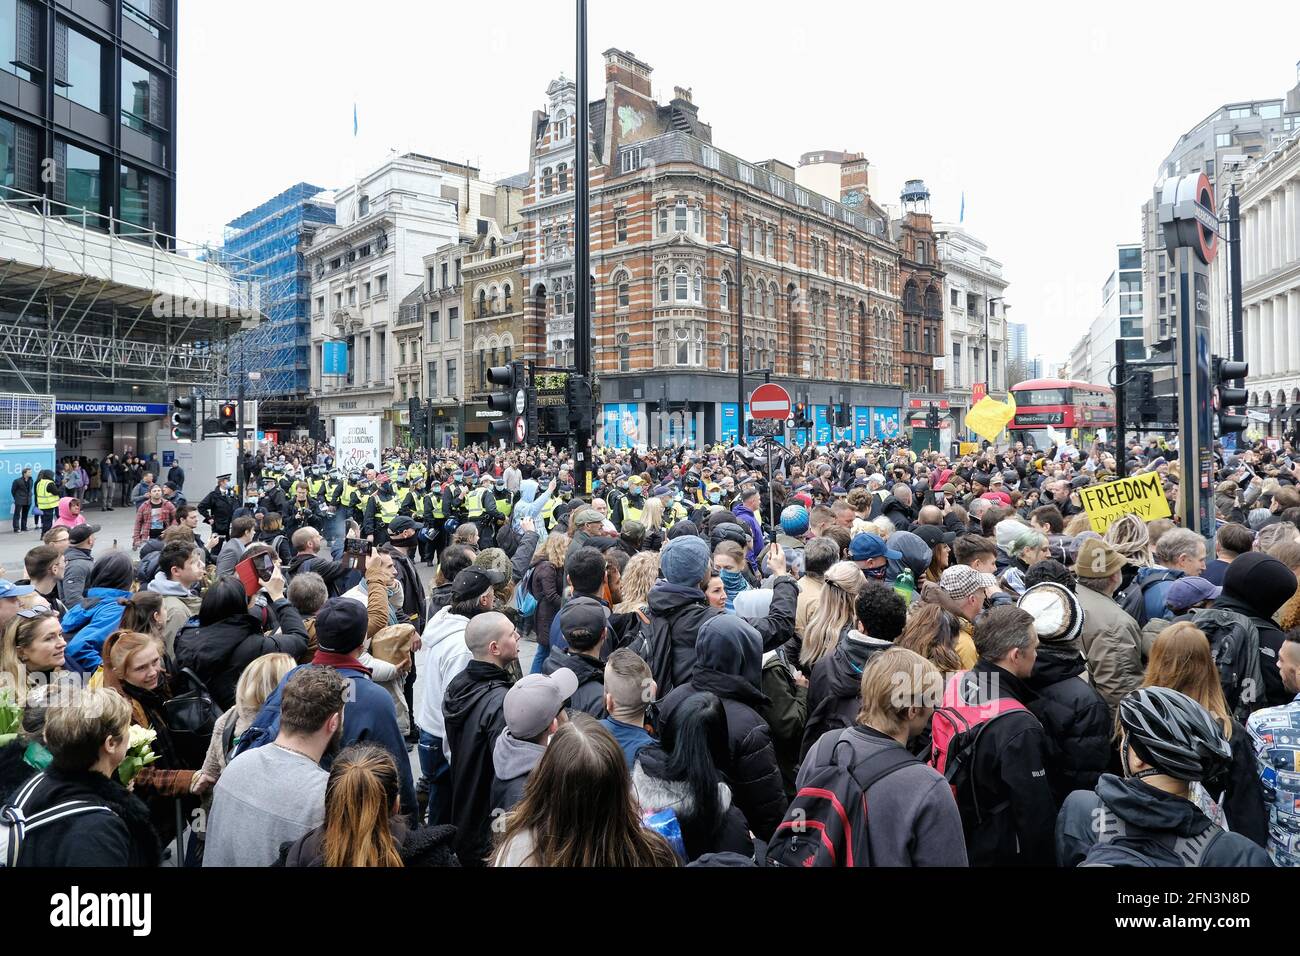 Anti-lockdown protesters converge on Tottenham Court road as numbers swelled to thousands. Protesters called for the end of lockdowns. Stock Photo